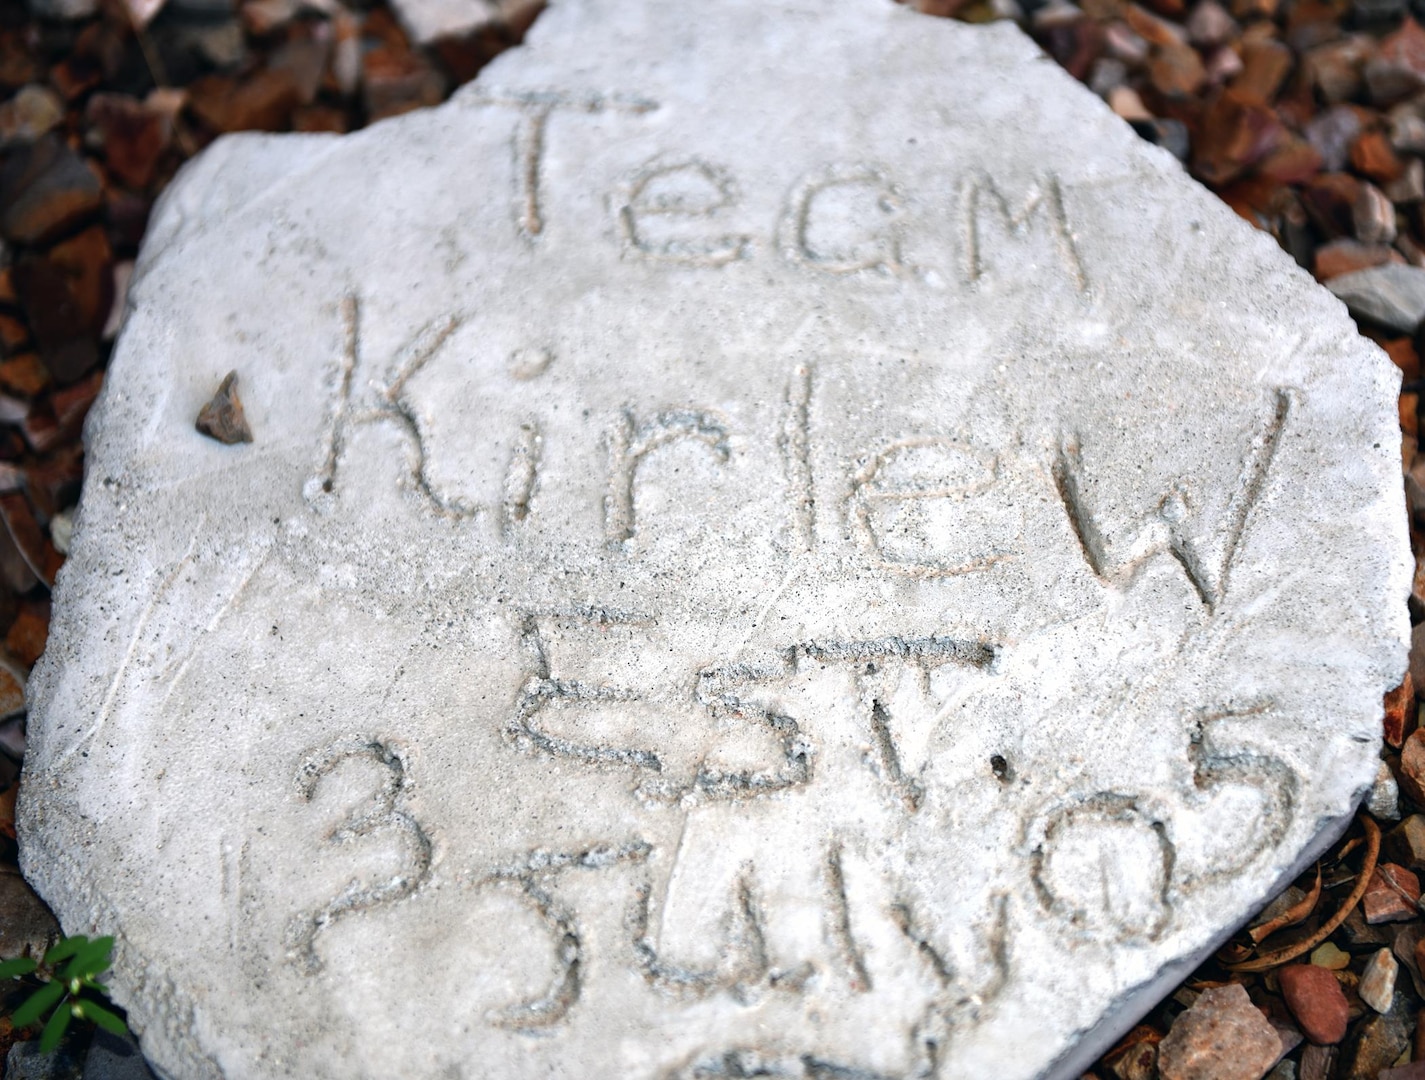 The Kirlew family motto, “Team Kirlew” etched on stone, just outside the entrance to the family’s home, serves a reminder to the family they are in the fight against cancer together.